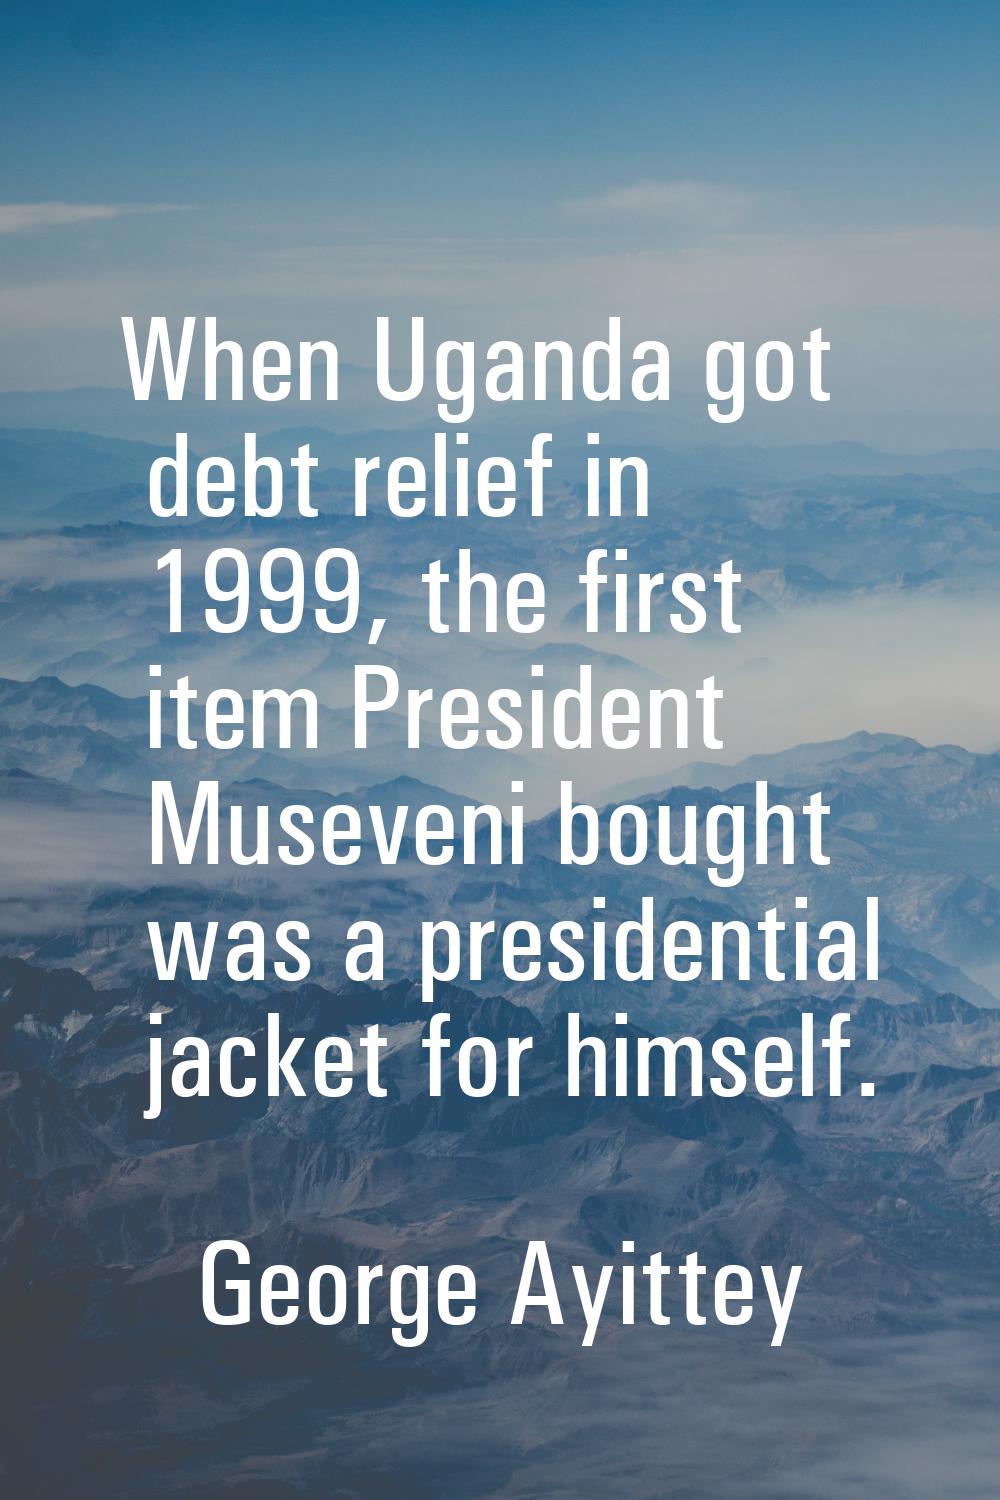 When Uganda got debt relief in 1999, the first item President Museveni bought was a presidential ja